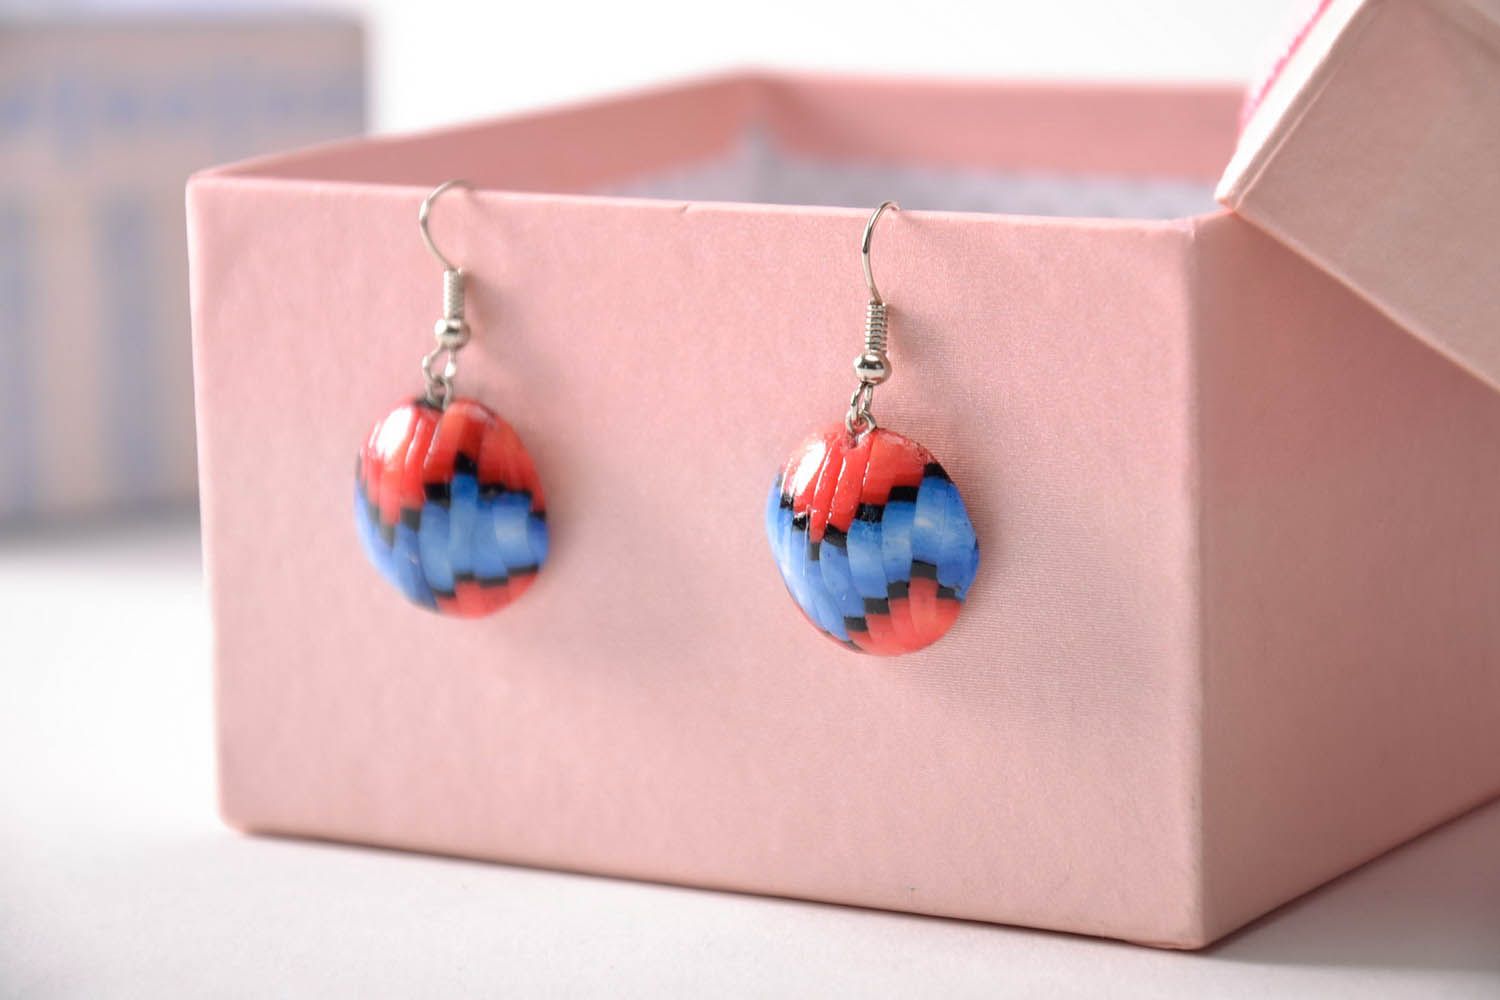 Earrings made using bargello technique photo 3